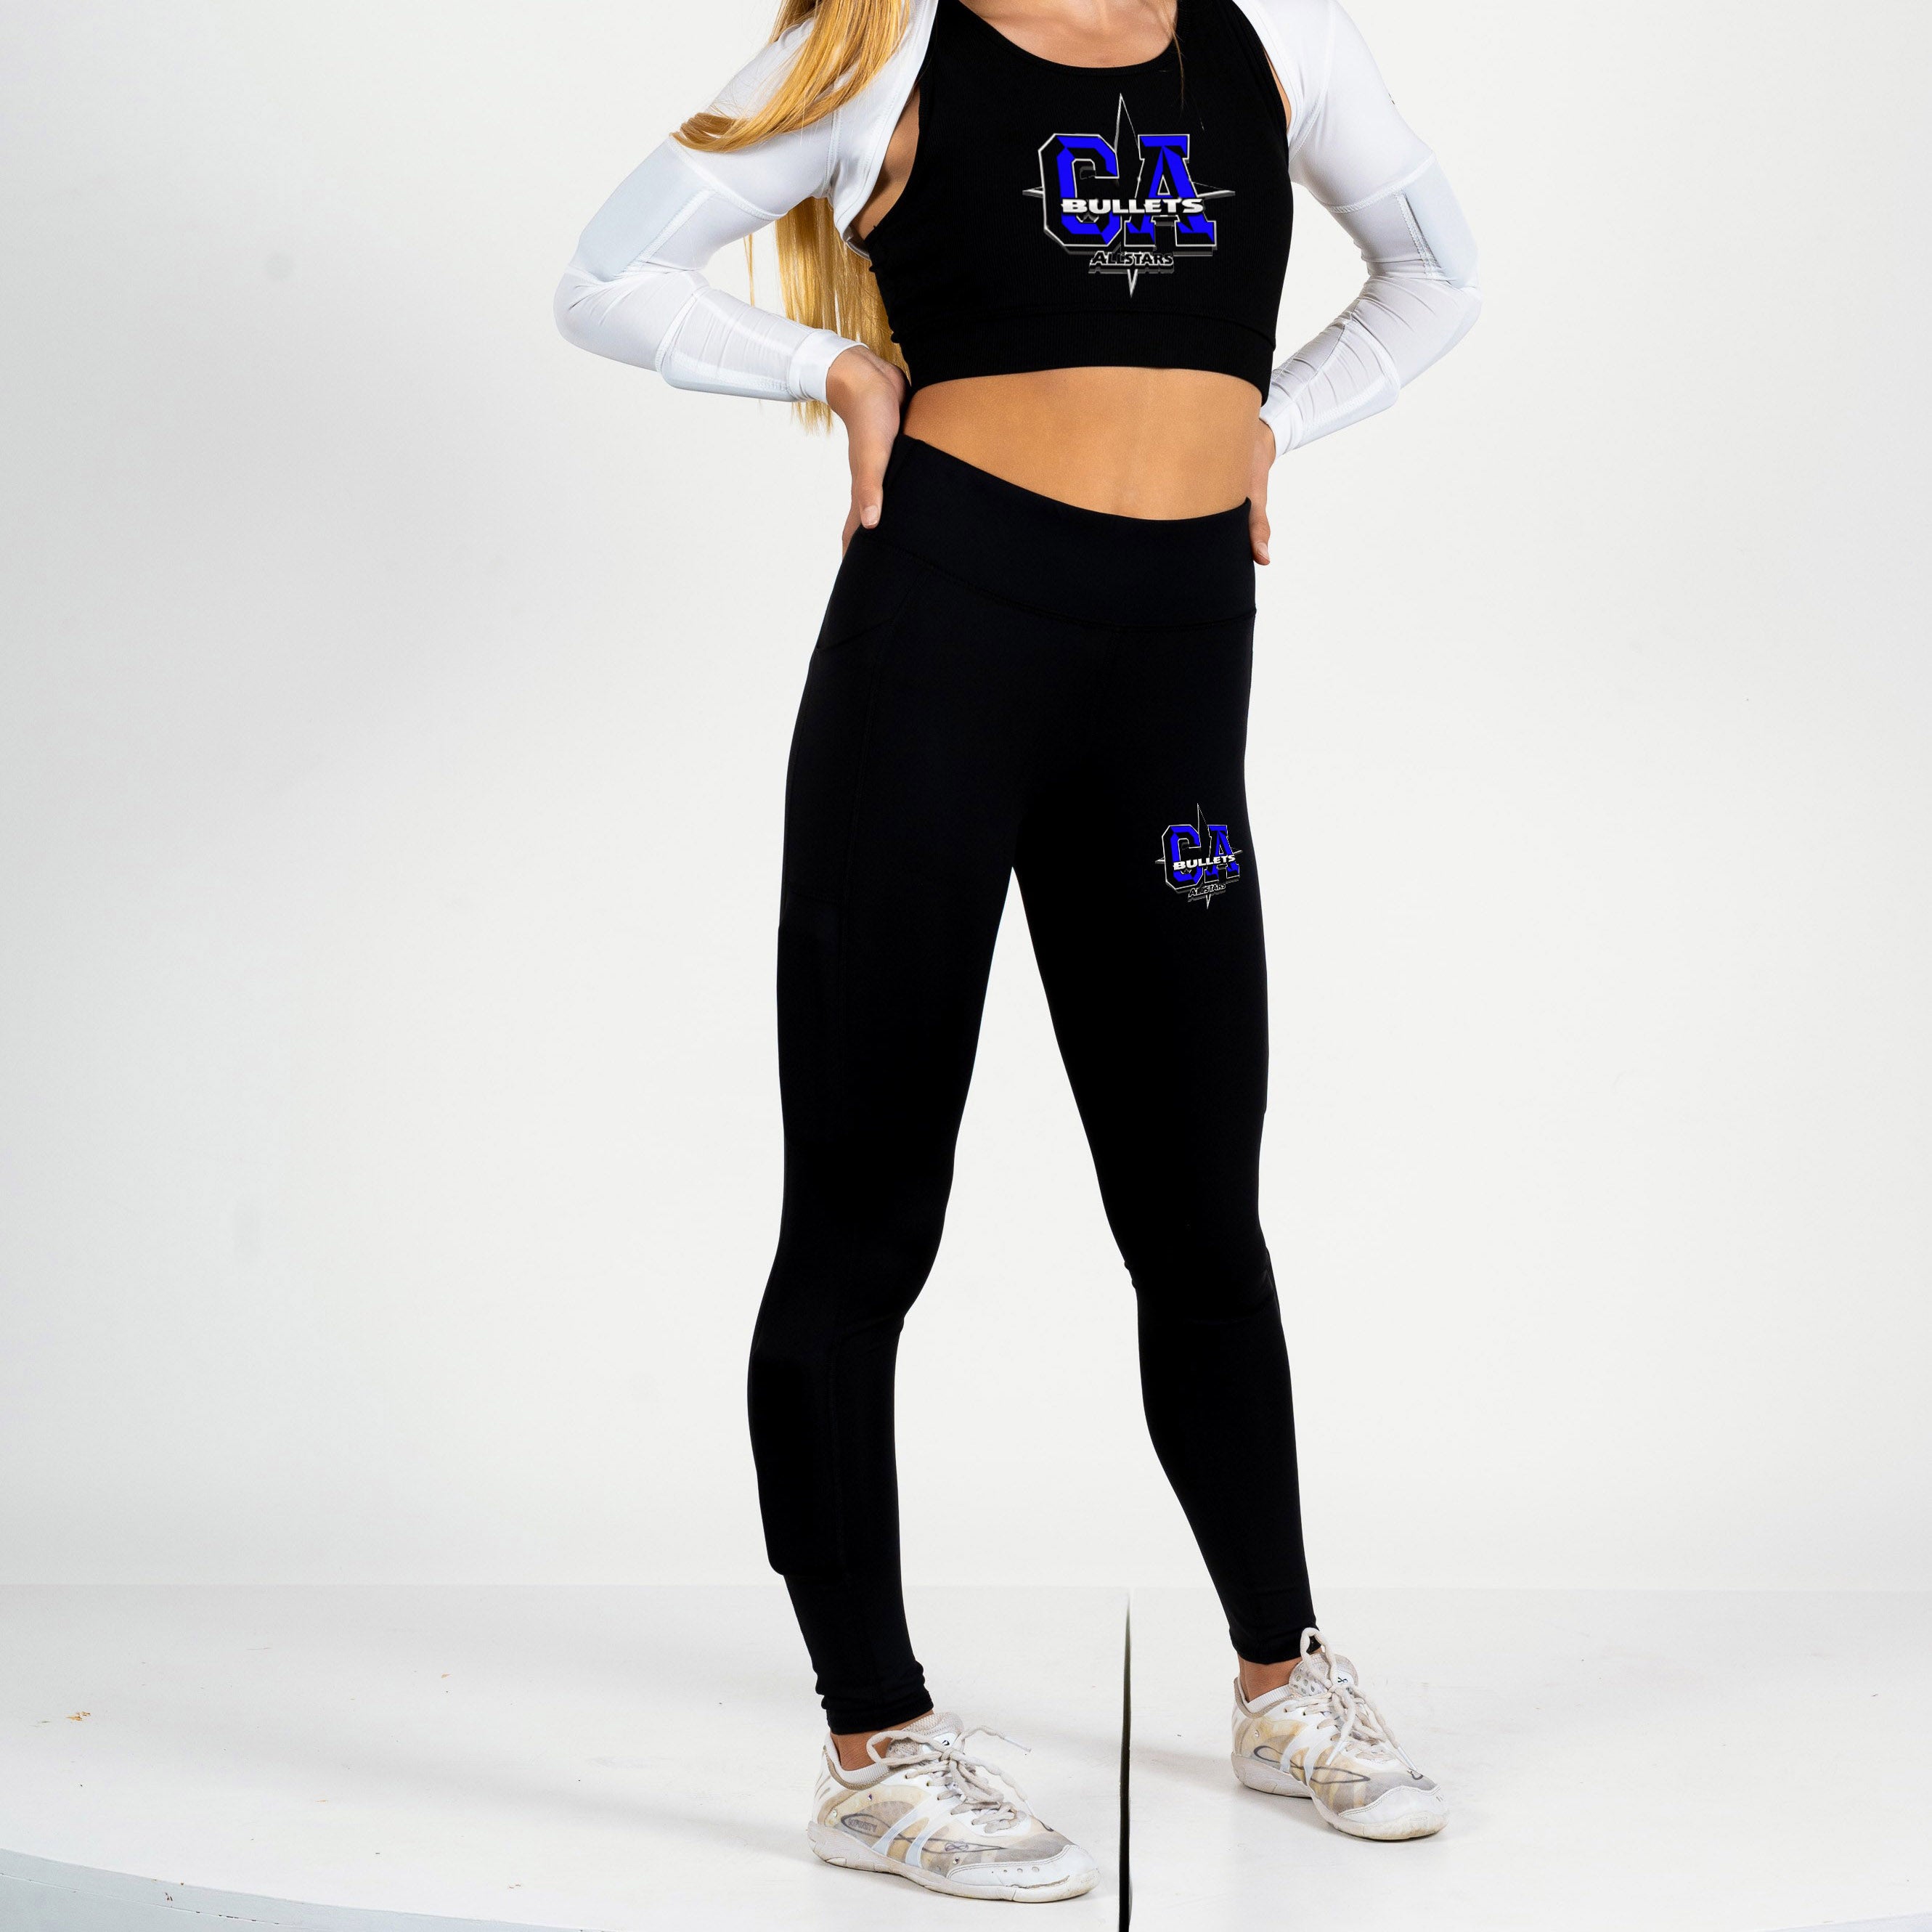 Girl wearing black kilogear cut legging showing weights on the calf and quad, side view